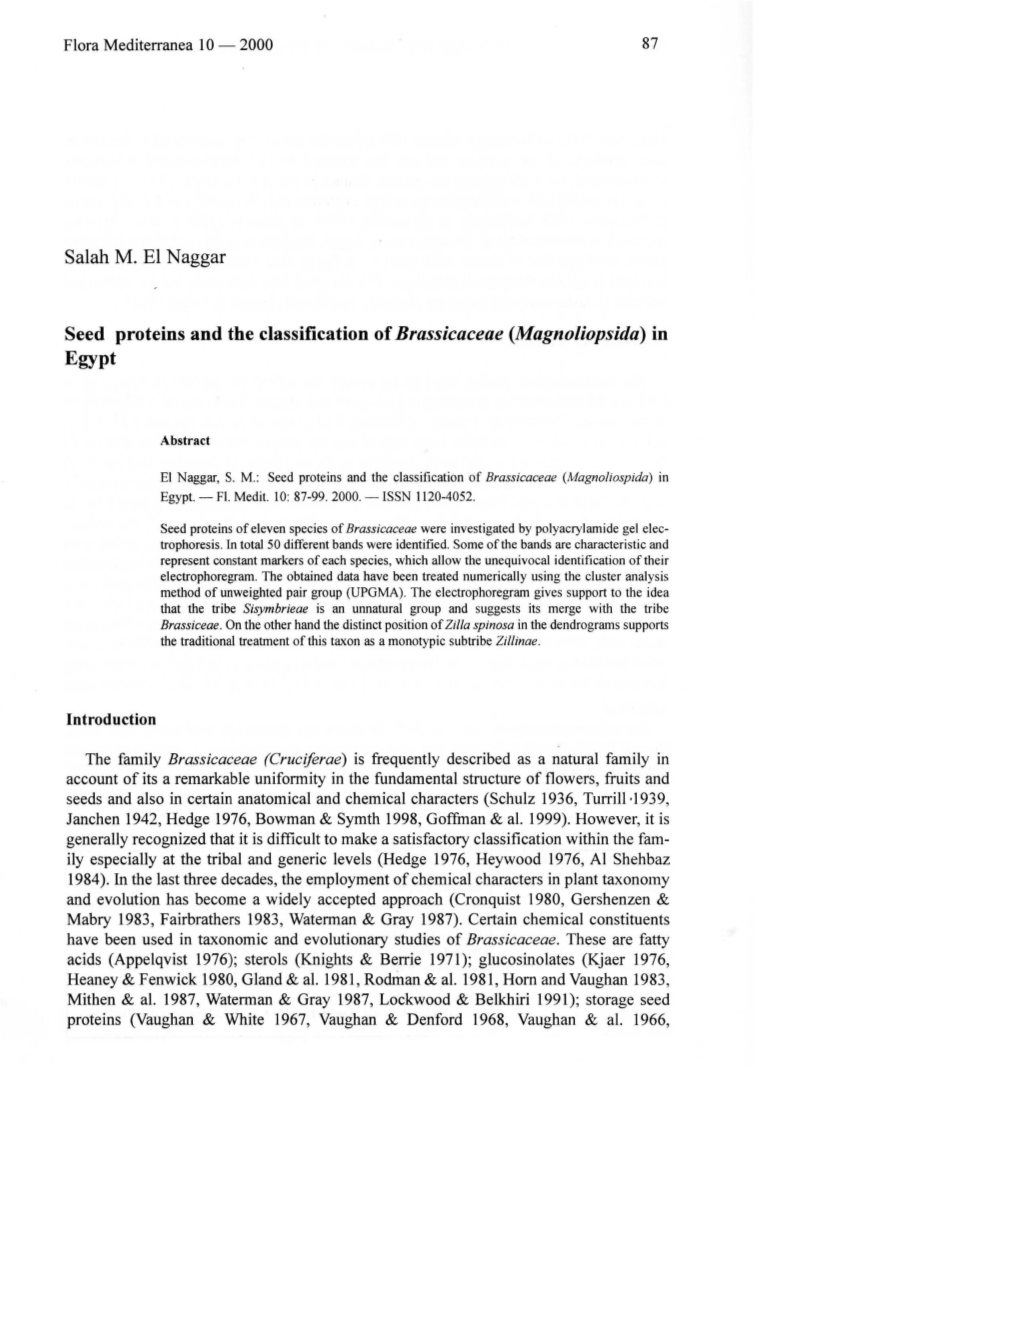 Salah M. El Naggar Seed Proteins and the Classification of Brassicaceae